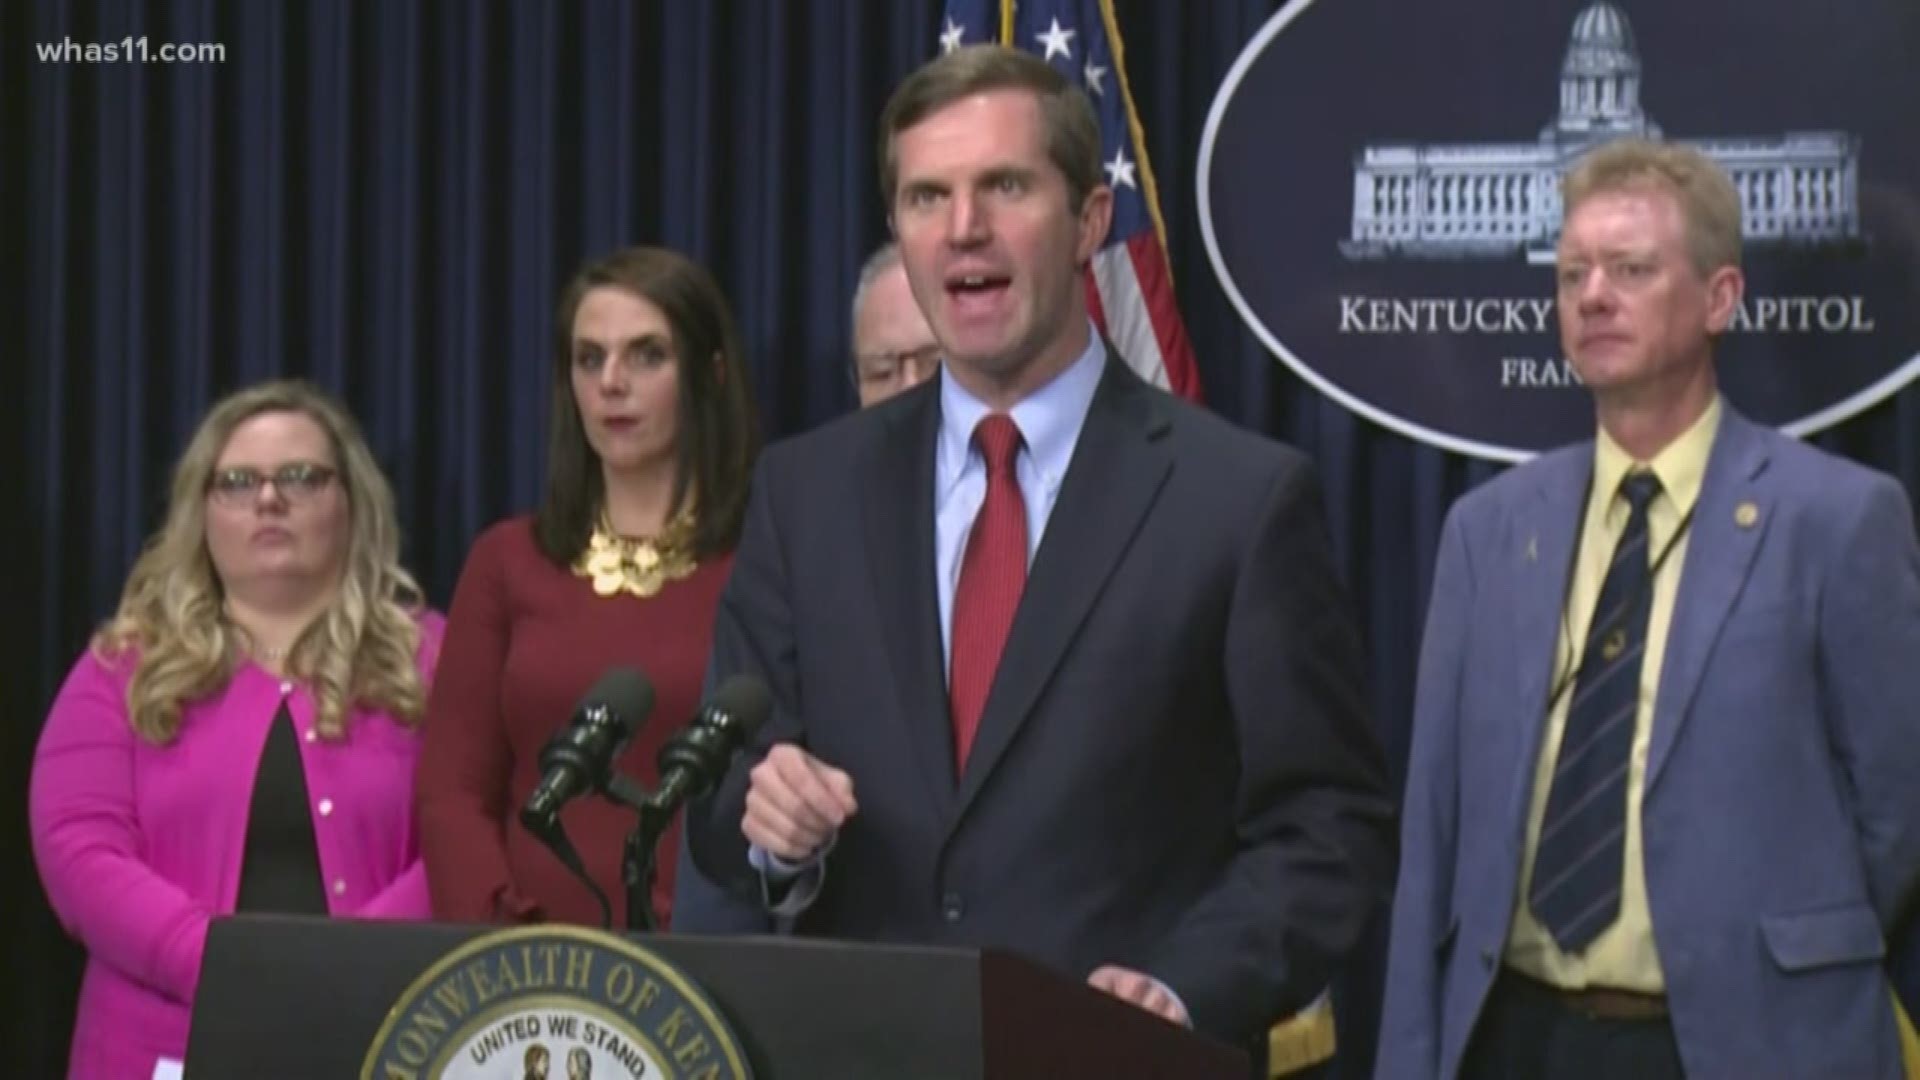 Beshear and Rep. Adam Koenig were joined Thursday by representatives of business and education groups to call for passage of the sports wagering measure.